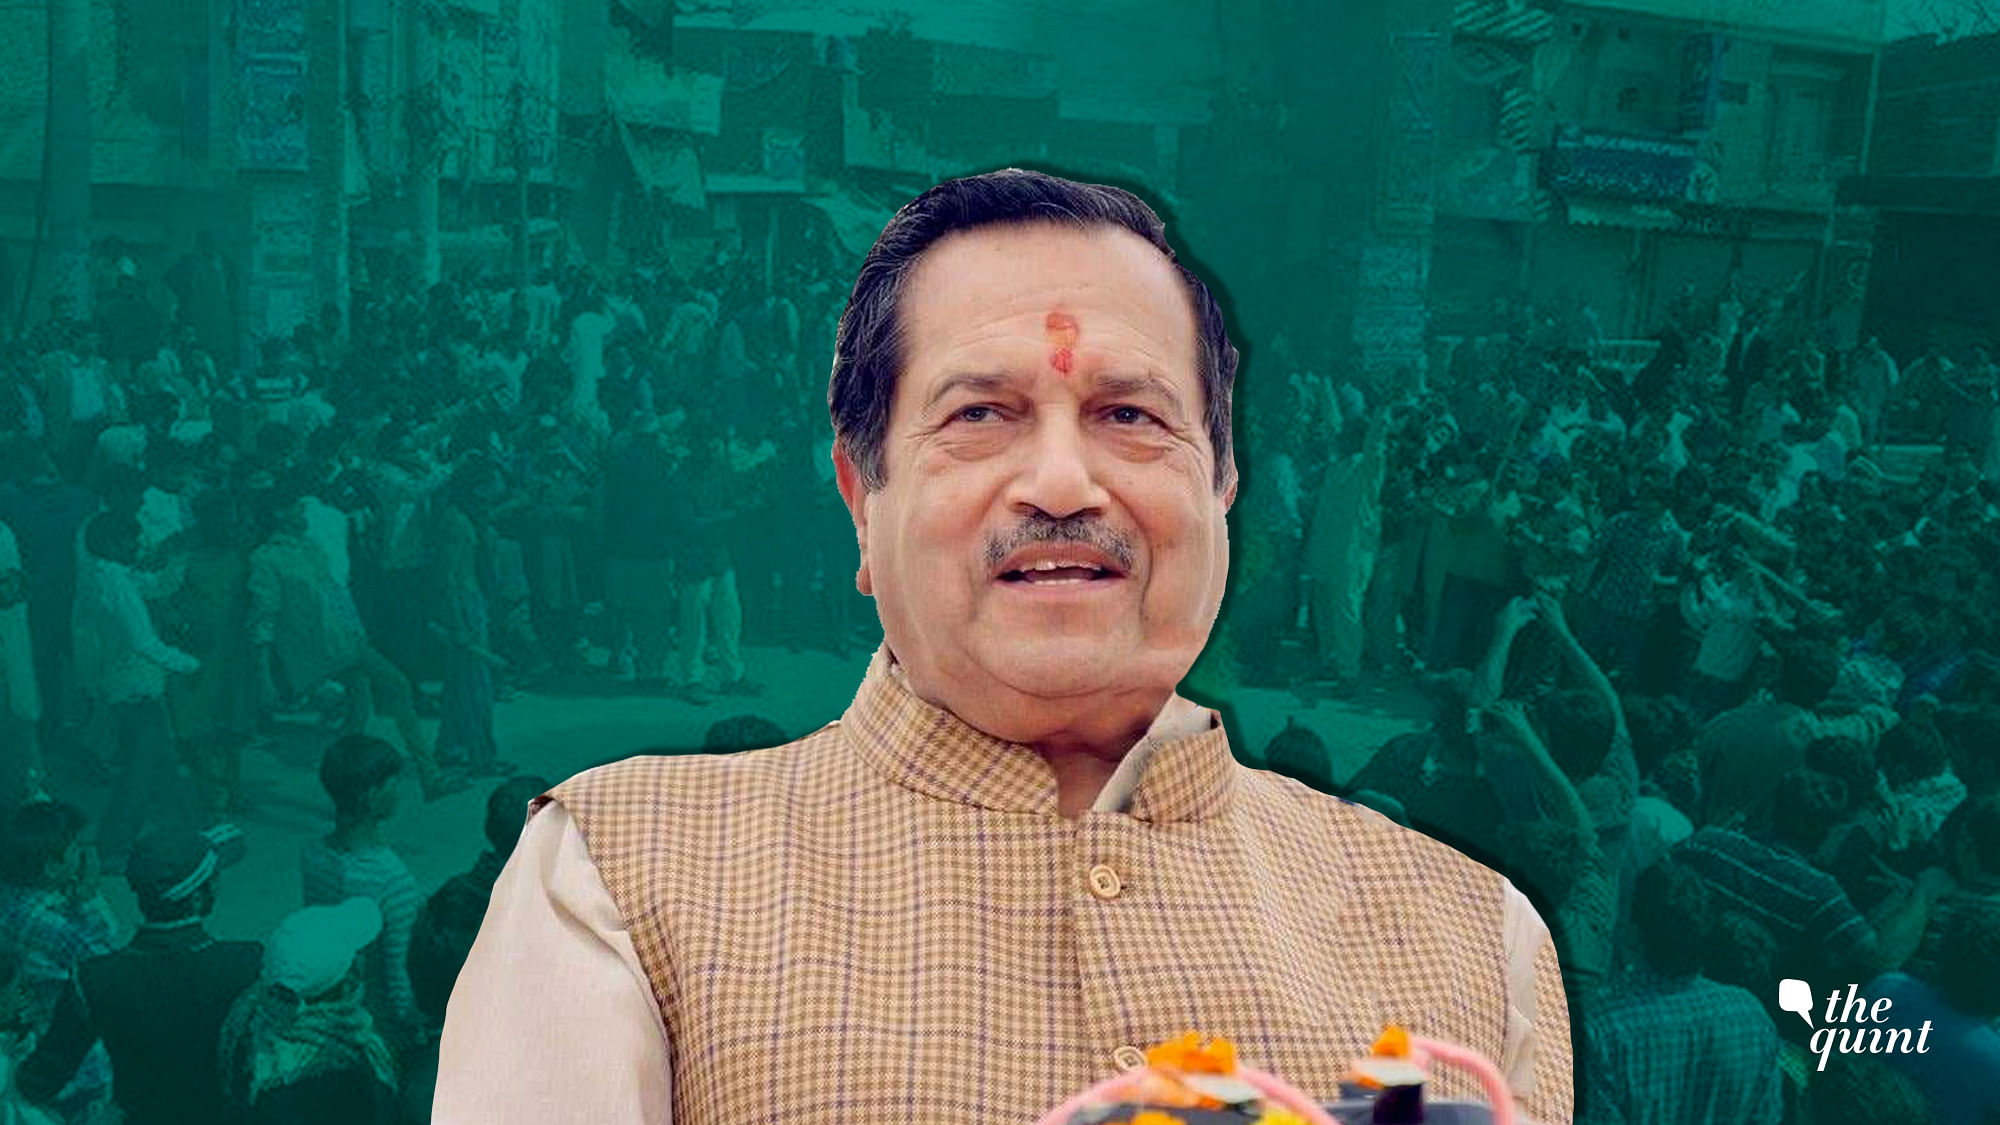 RSS Leader Indresh Kumar has claimed that&nbsp;cow slaughter was banned across religions like Islam and Christianity.